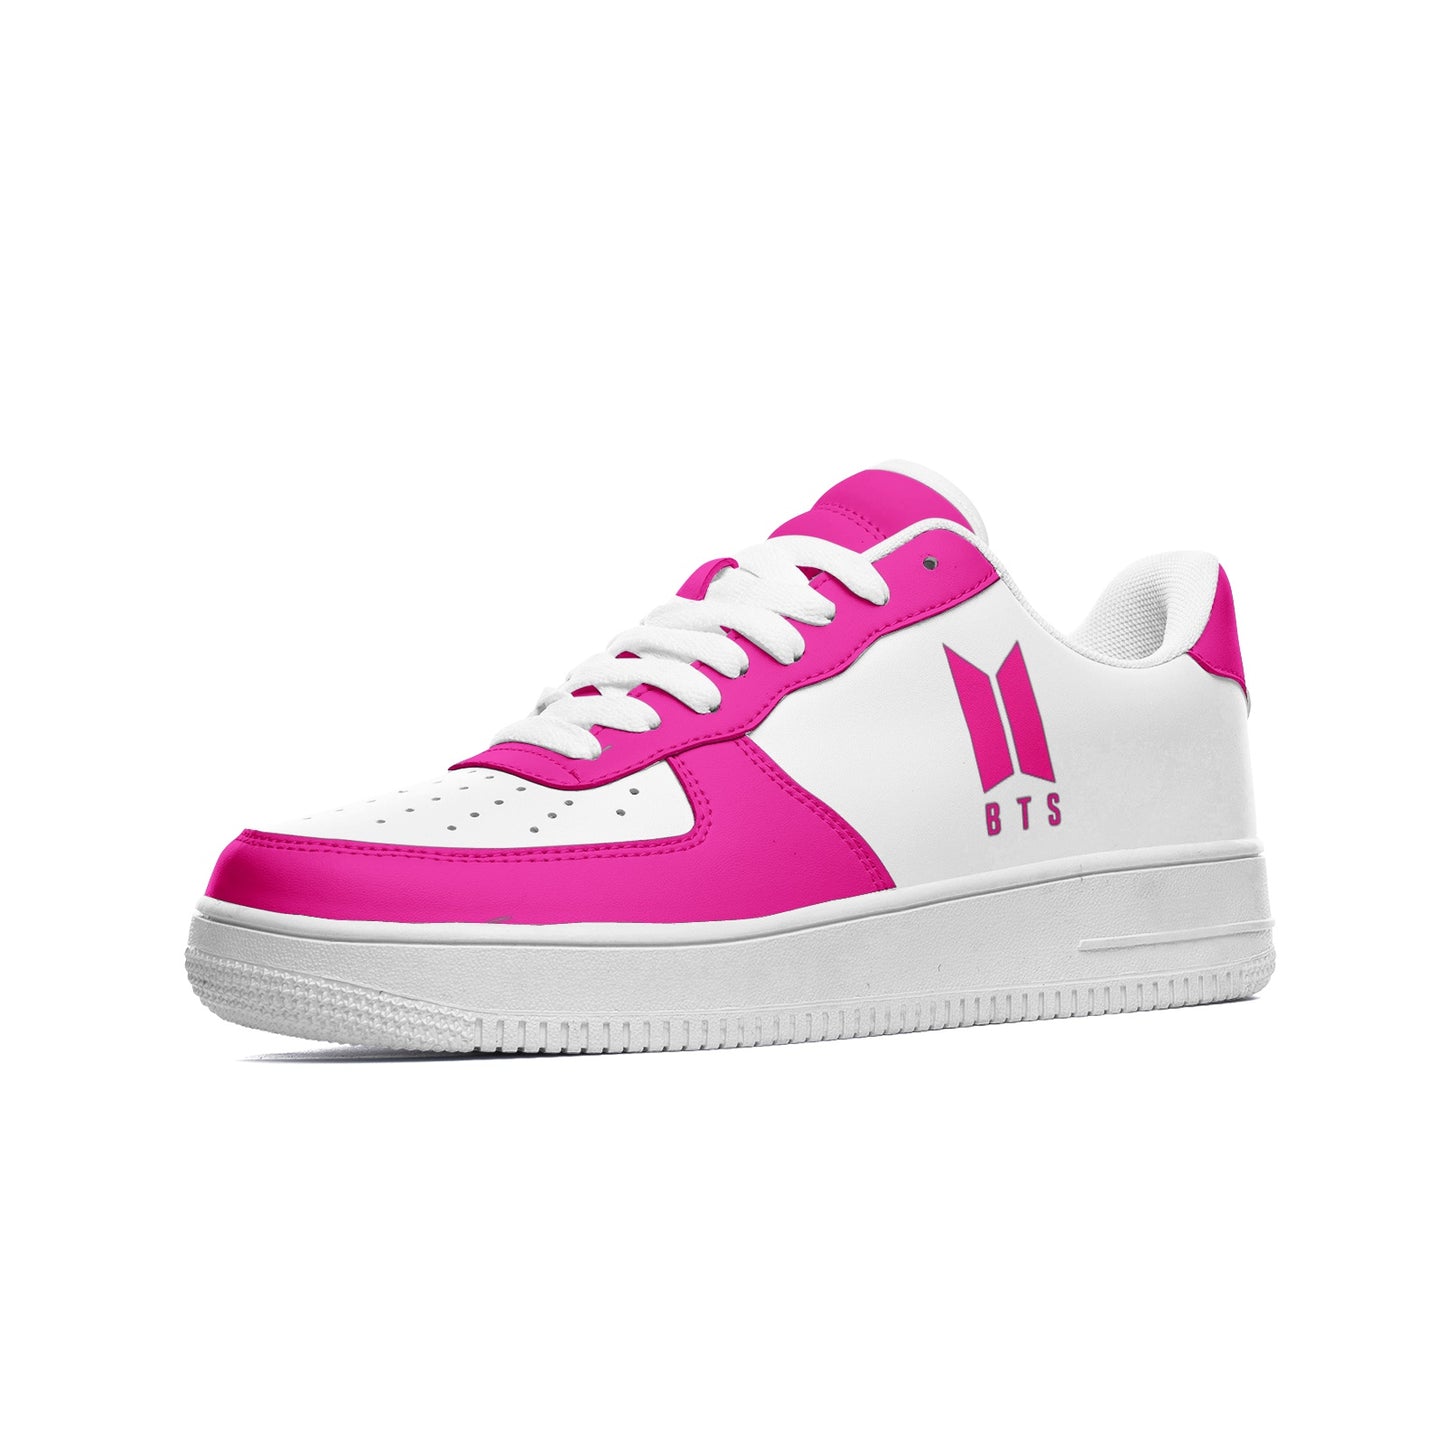 BTS Logo Unisex Low Top Leather Sneakers Hot Pink - SD-style-shop